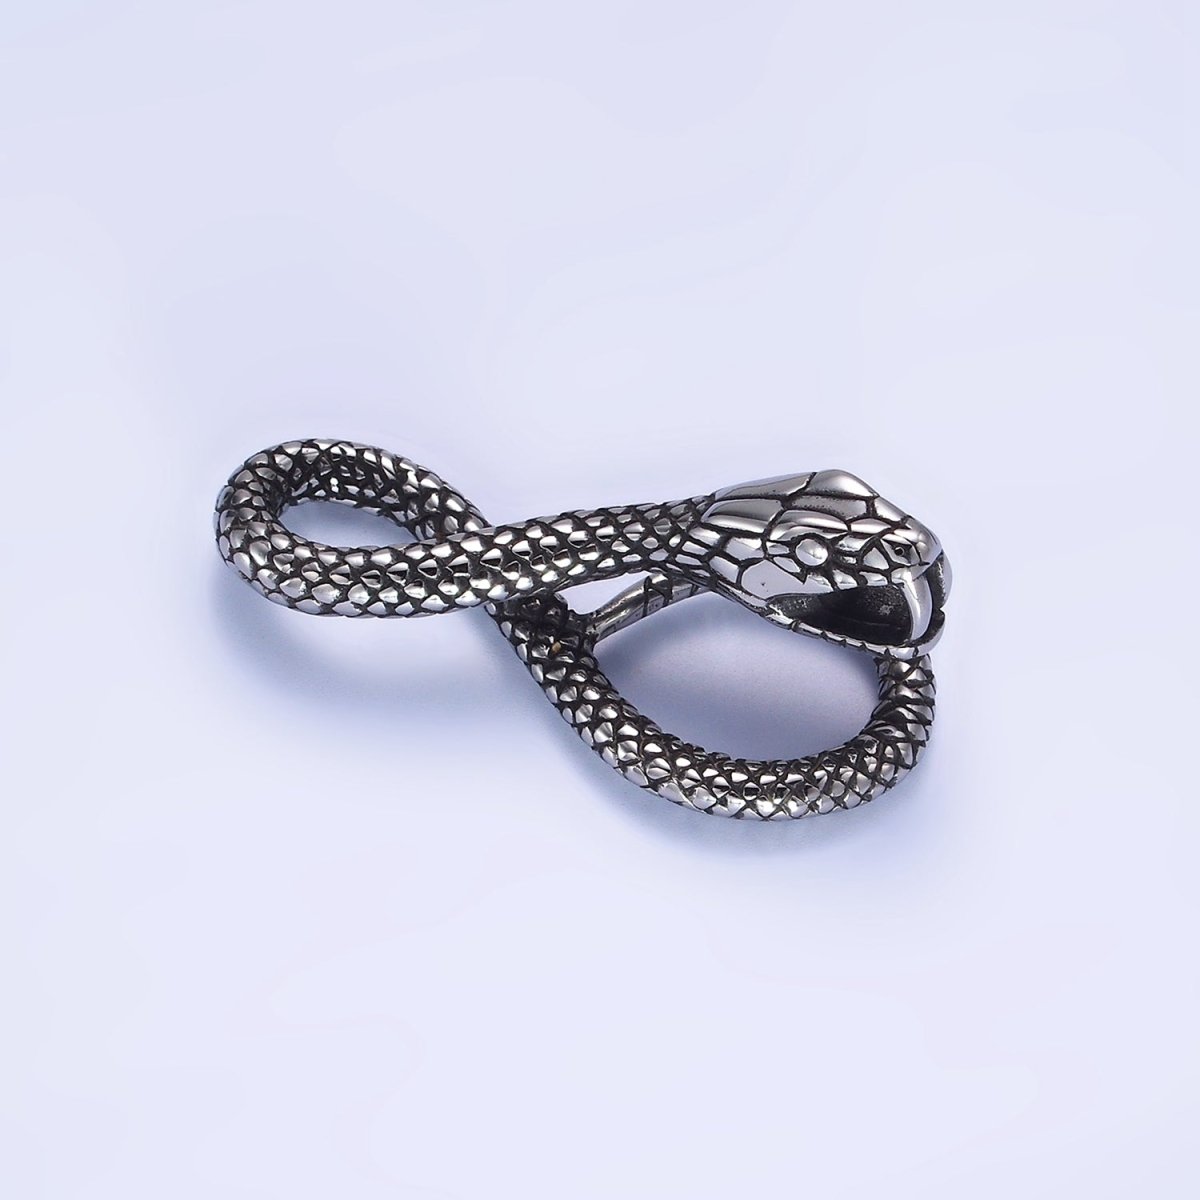 Stainless Steel 50mm Scale-Textured Leaping Snake Serpent Animal Infinity Pendant | P1417 - DLUXCA